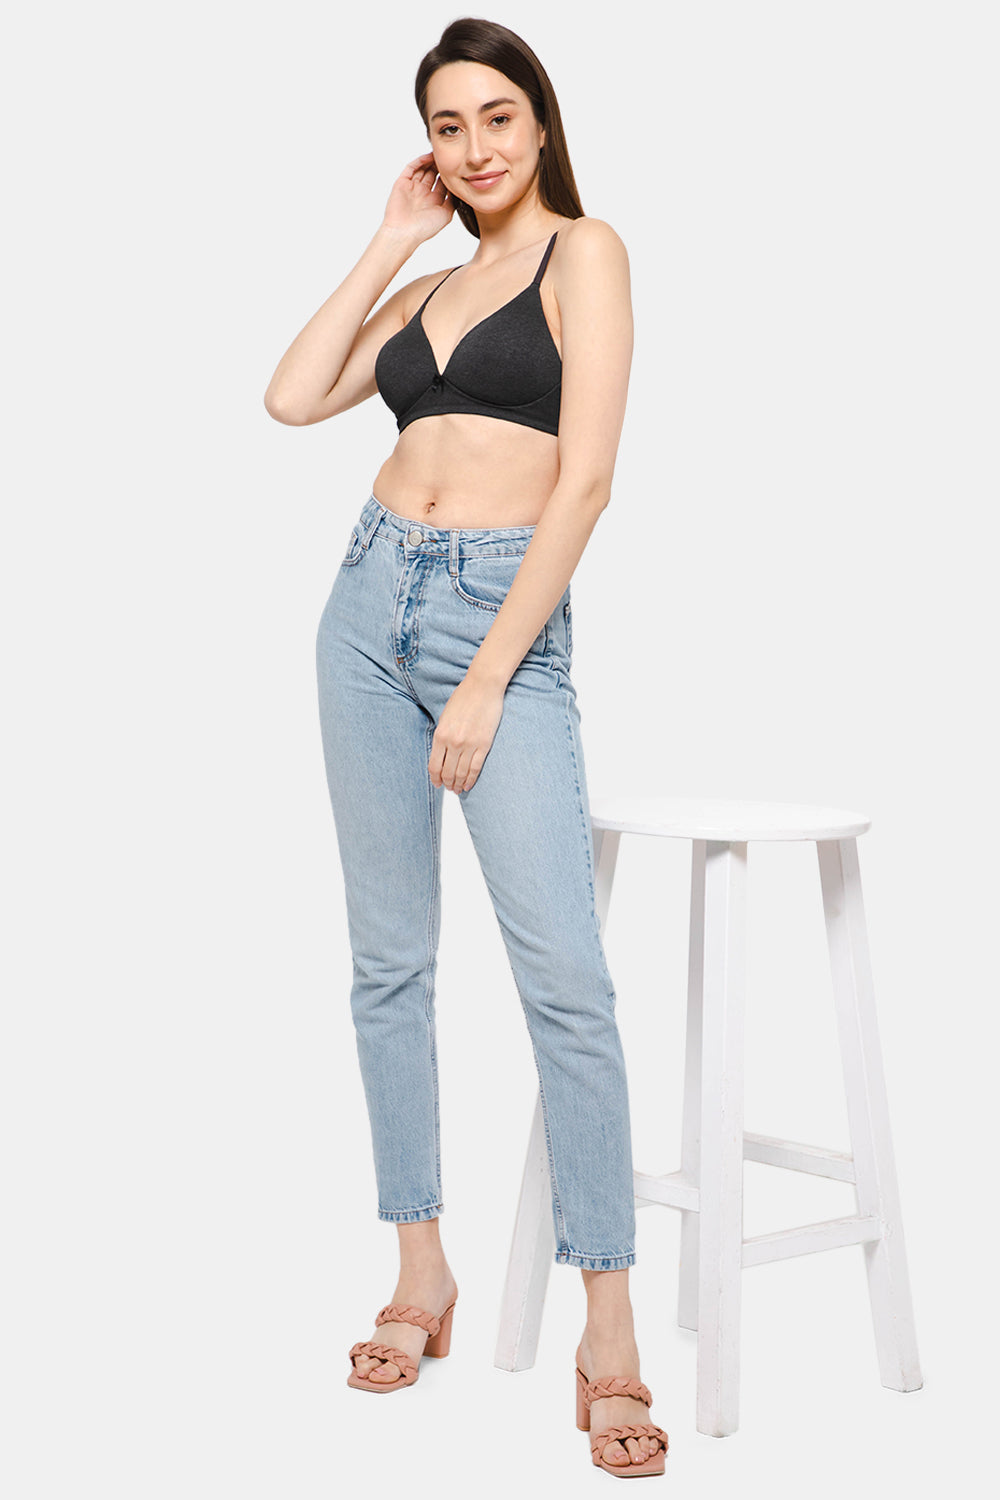 Aerie Seamless Padded Bralette  Men's & Women's Jeans, Clothes